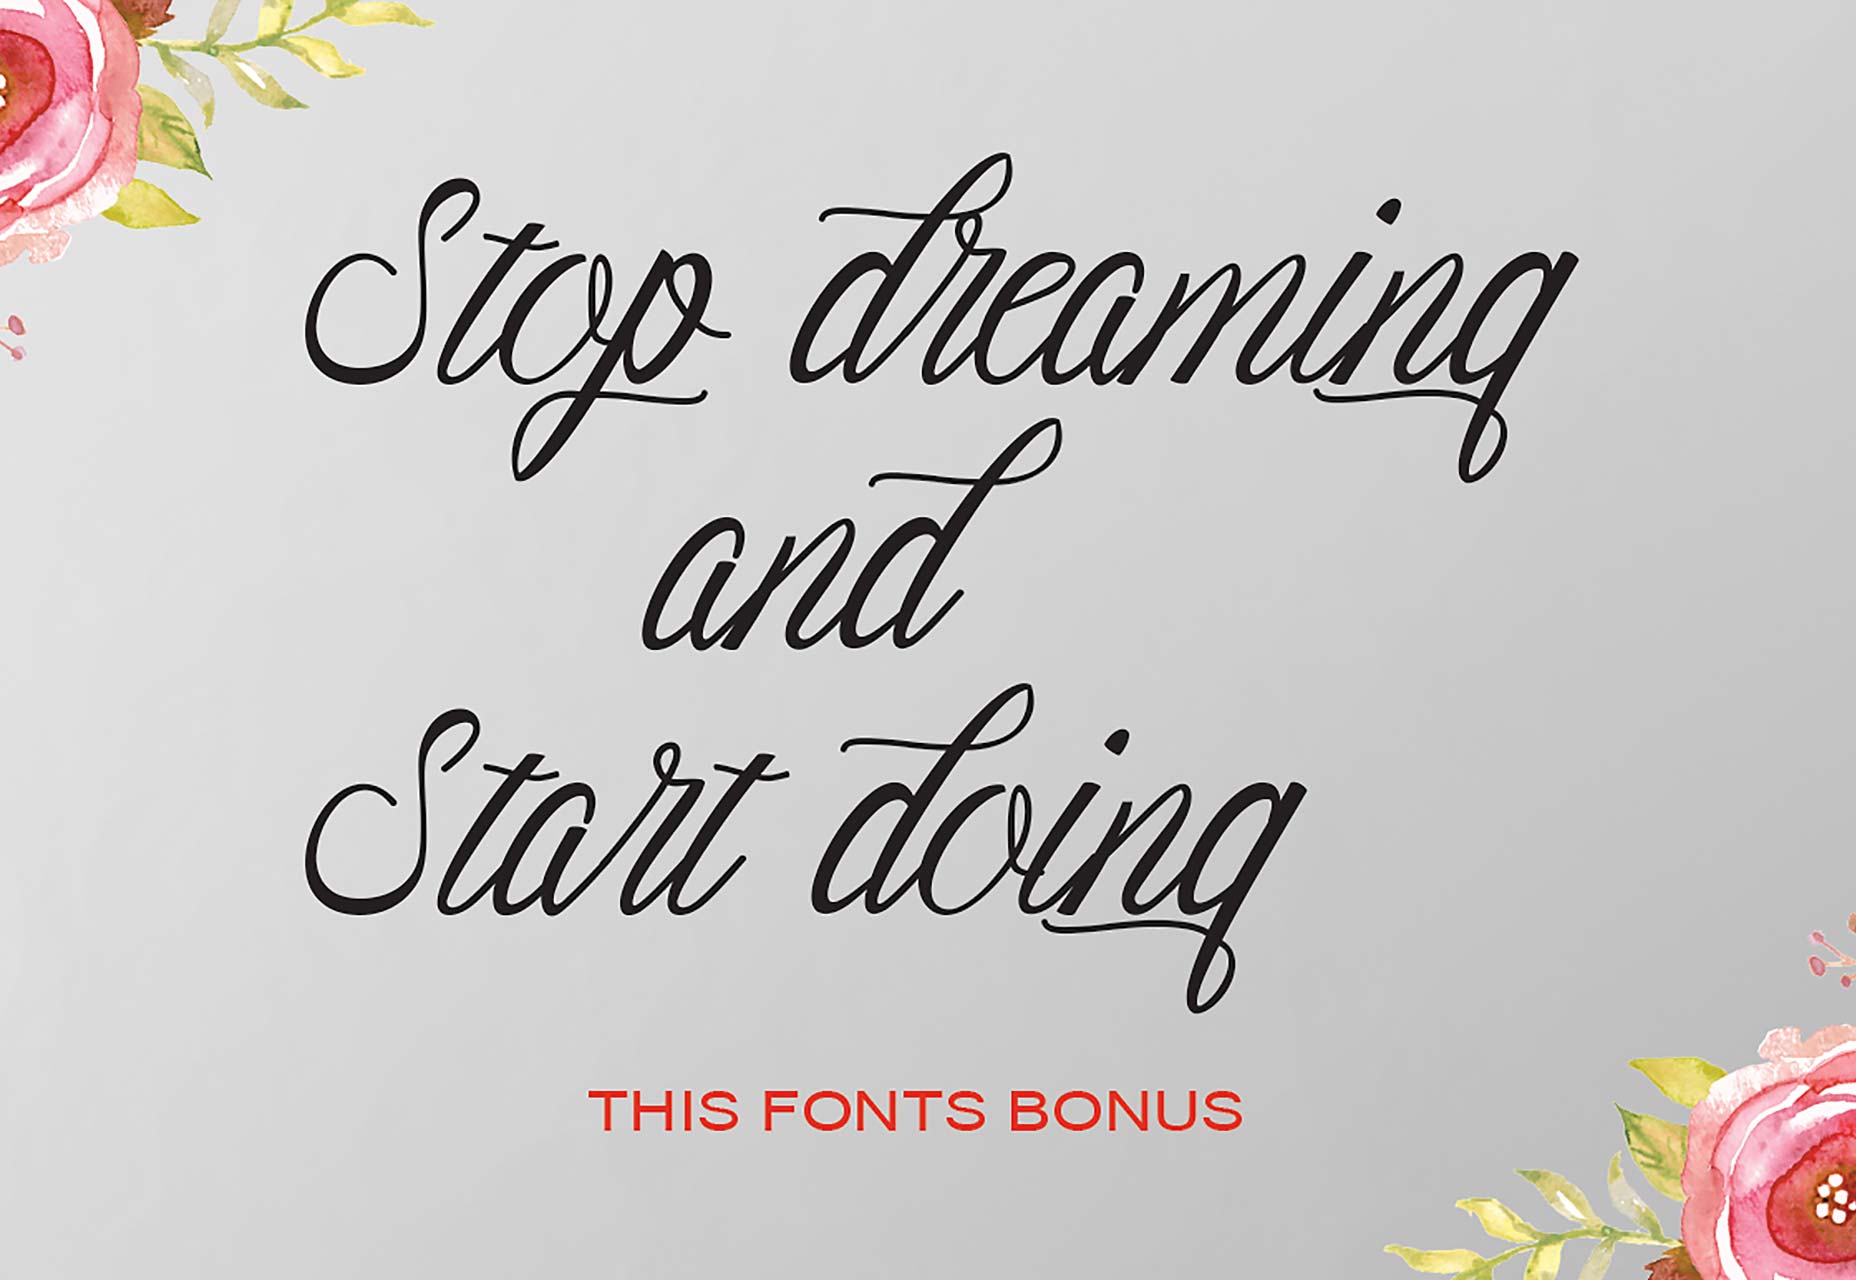 image fonts free download